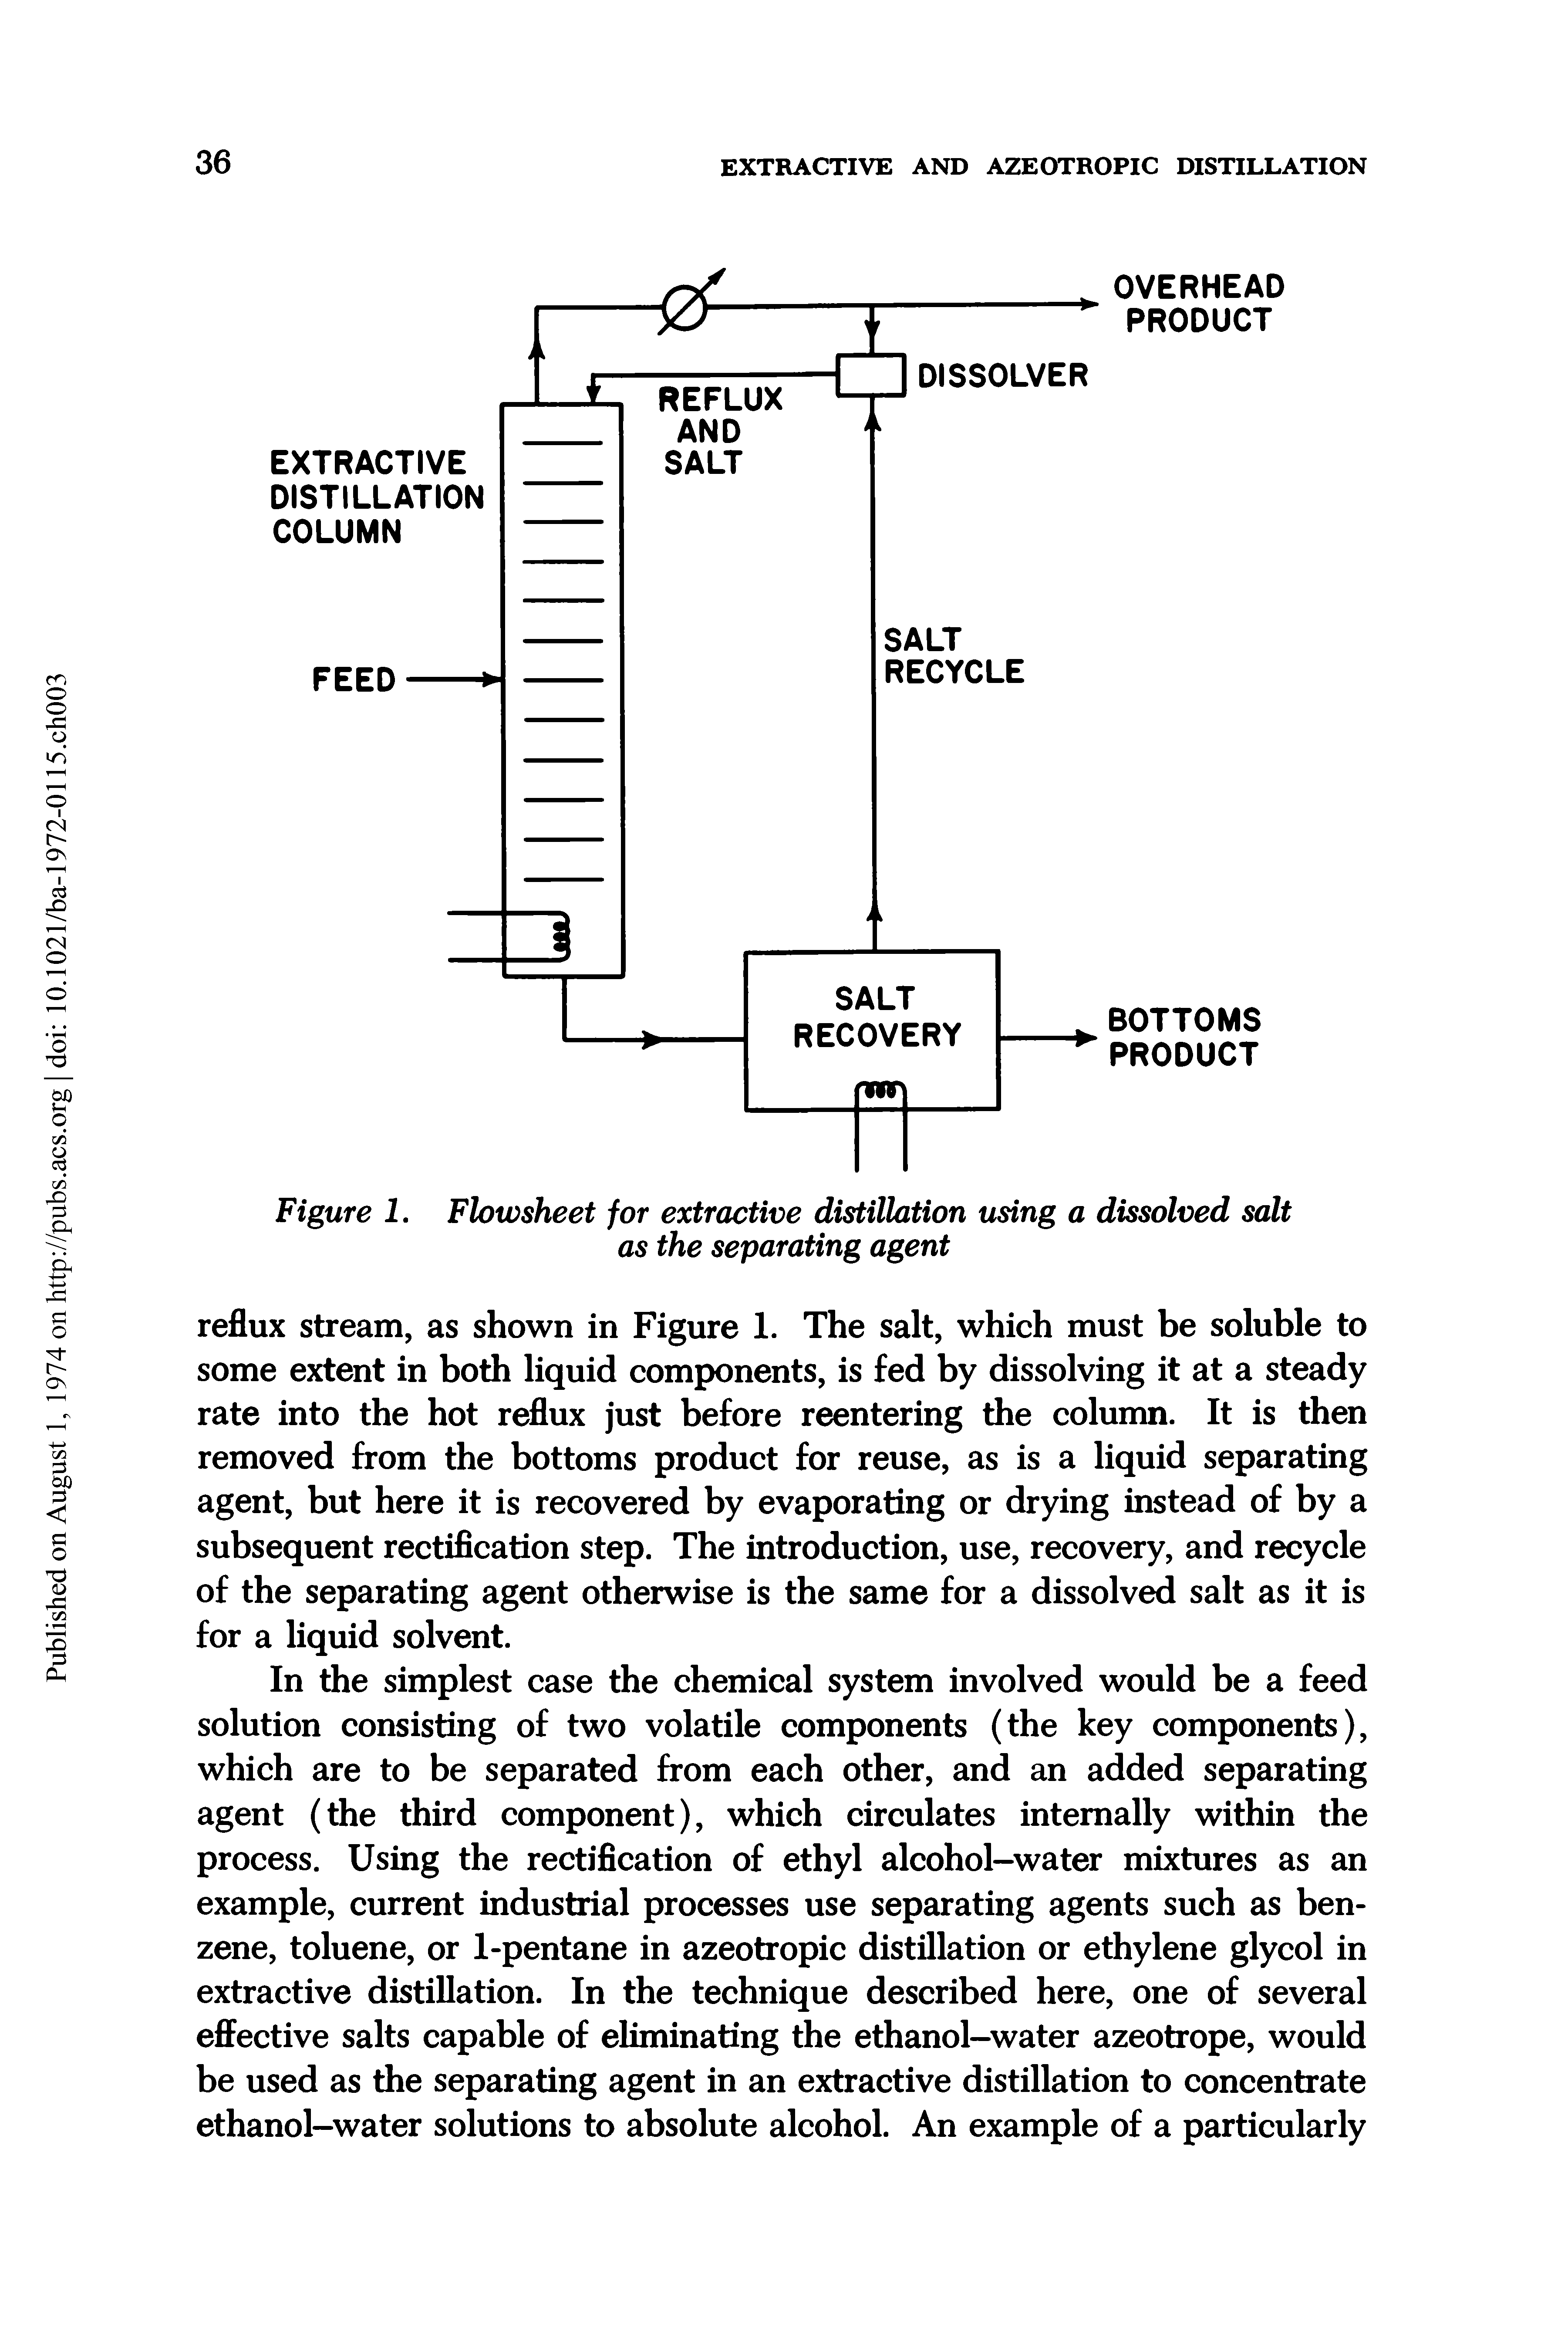 Figure 1. Flowsheet for extractive distillation using a dissolved salt as the separating agent...